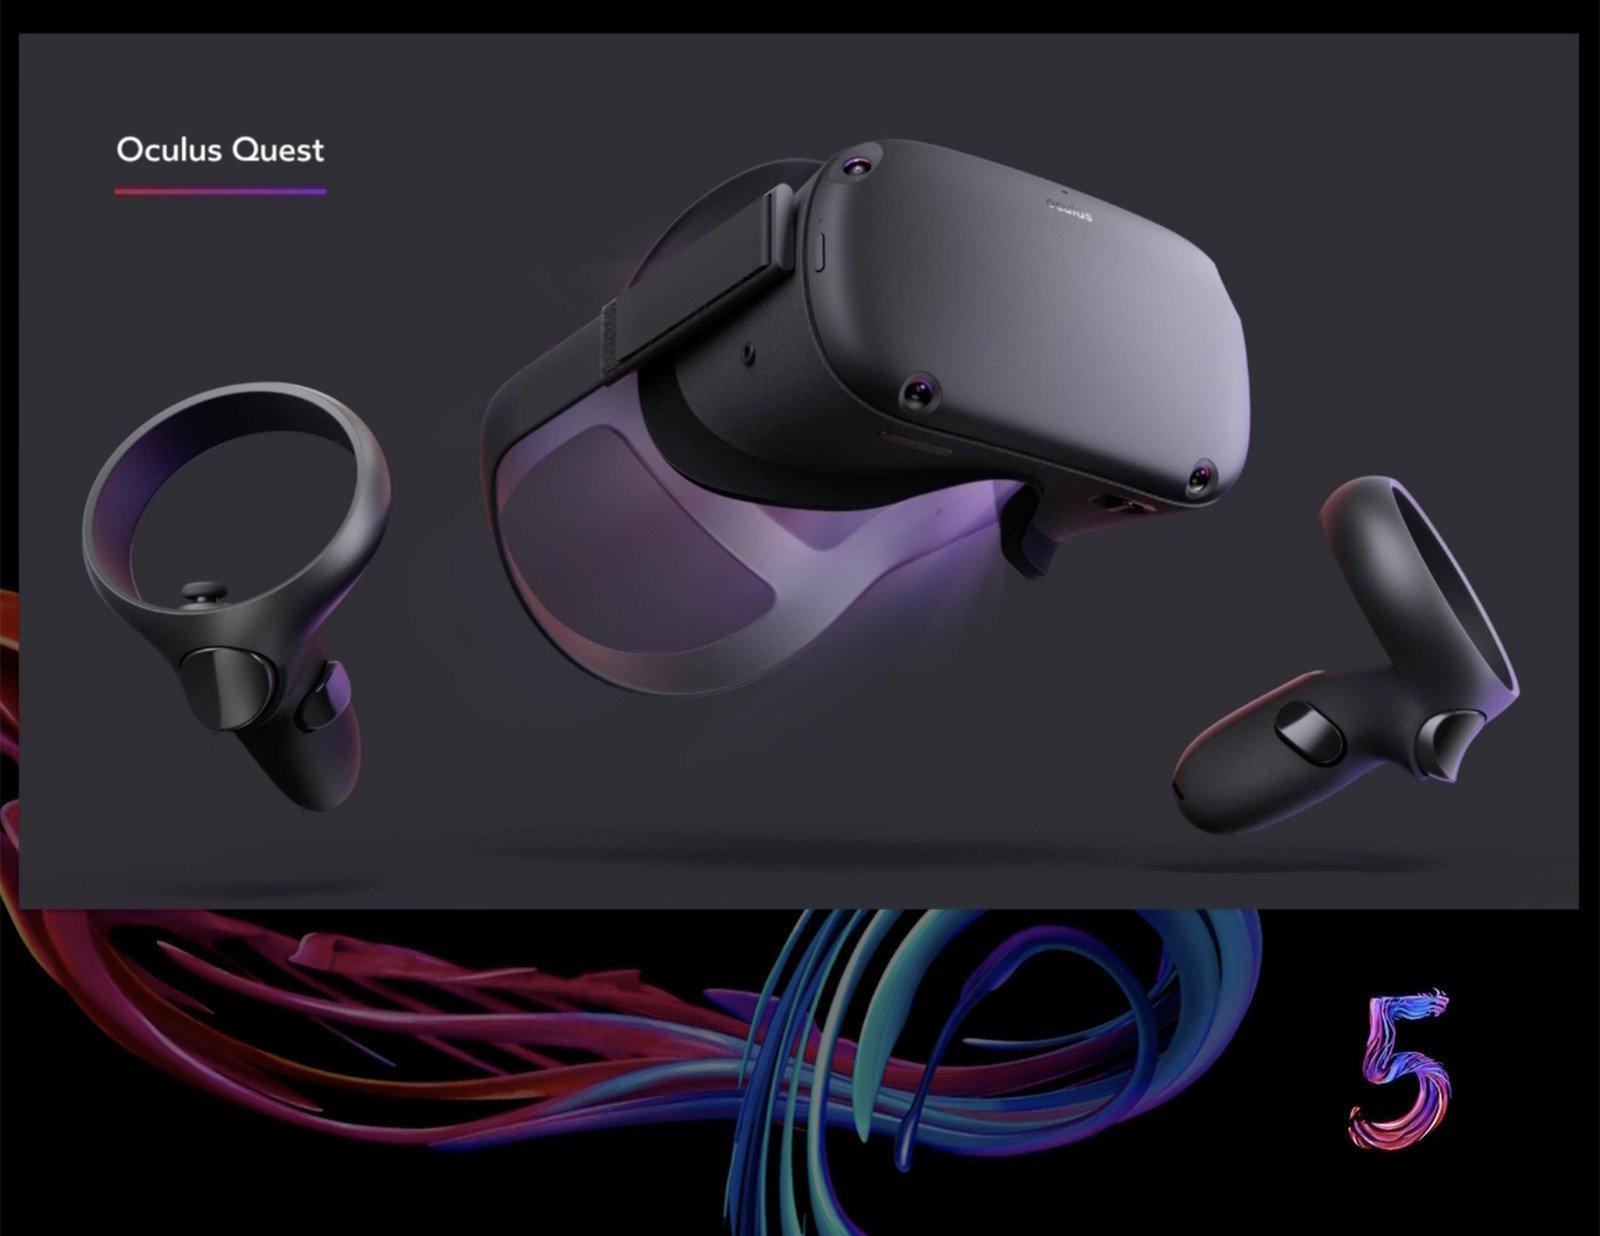 Oculus Quest: Everything you need to know